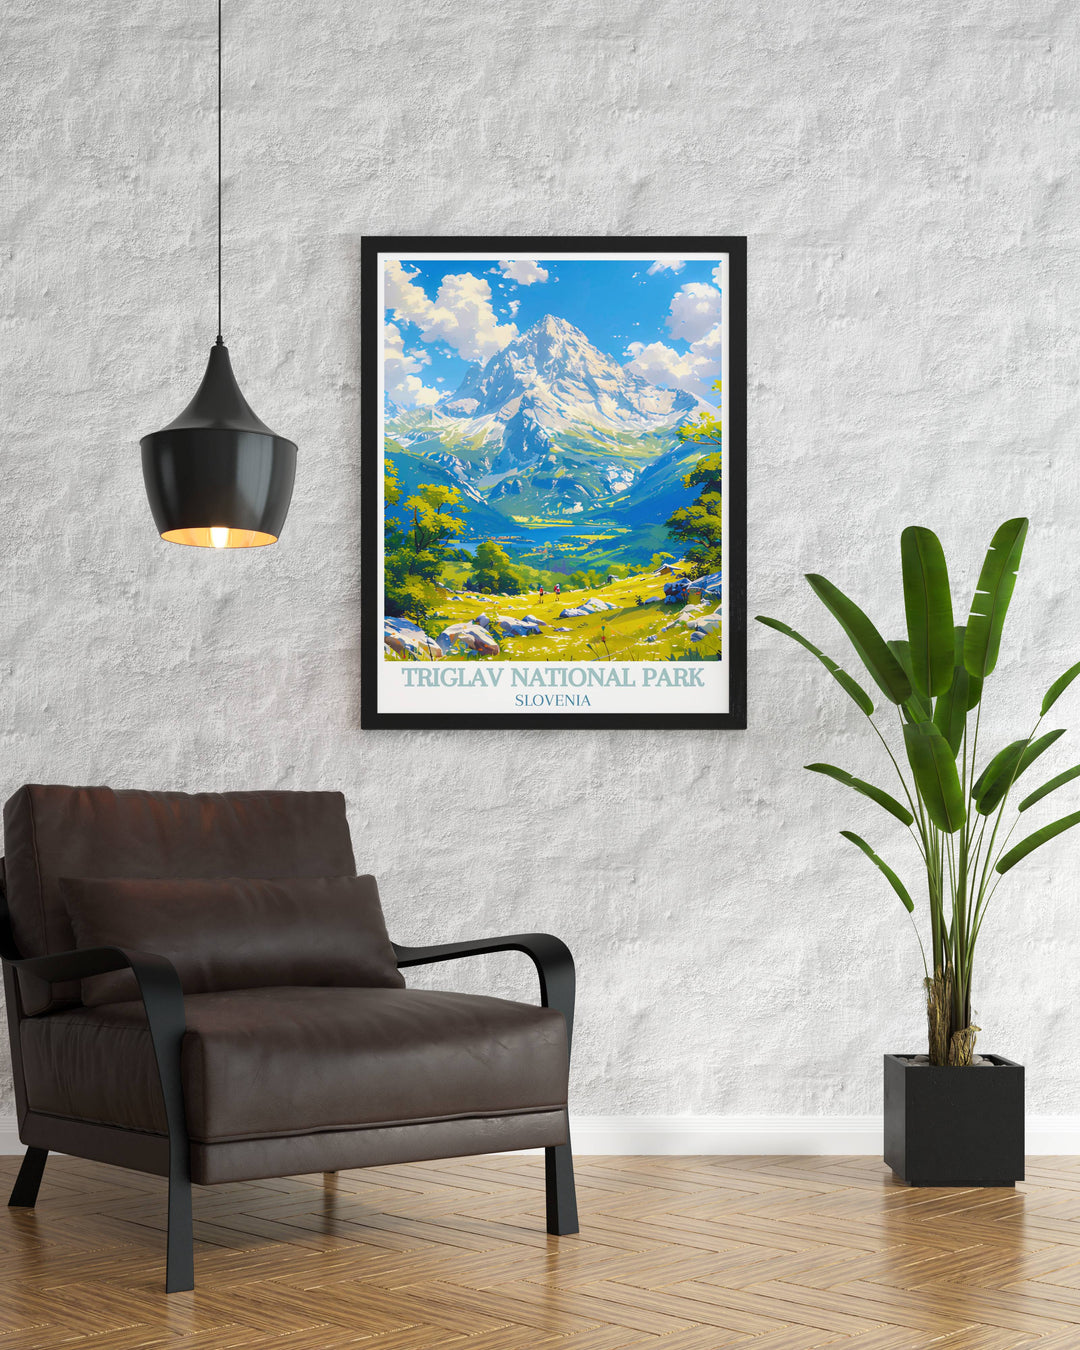 Exquisite print of Triglav National Park, capturing the adventurous spirit with views of Mount Triglav and serene glacial lakes.